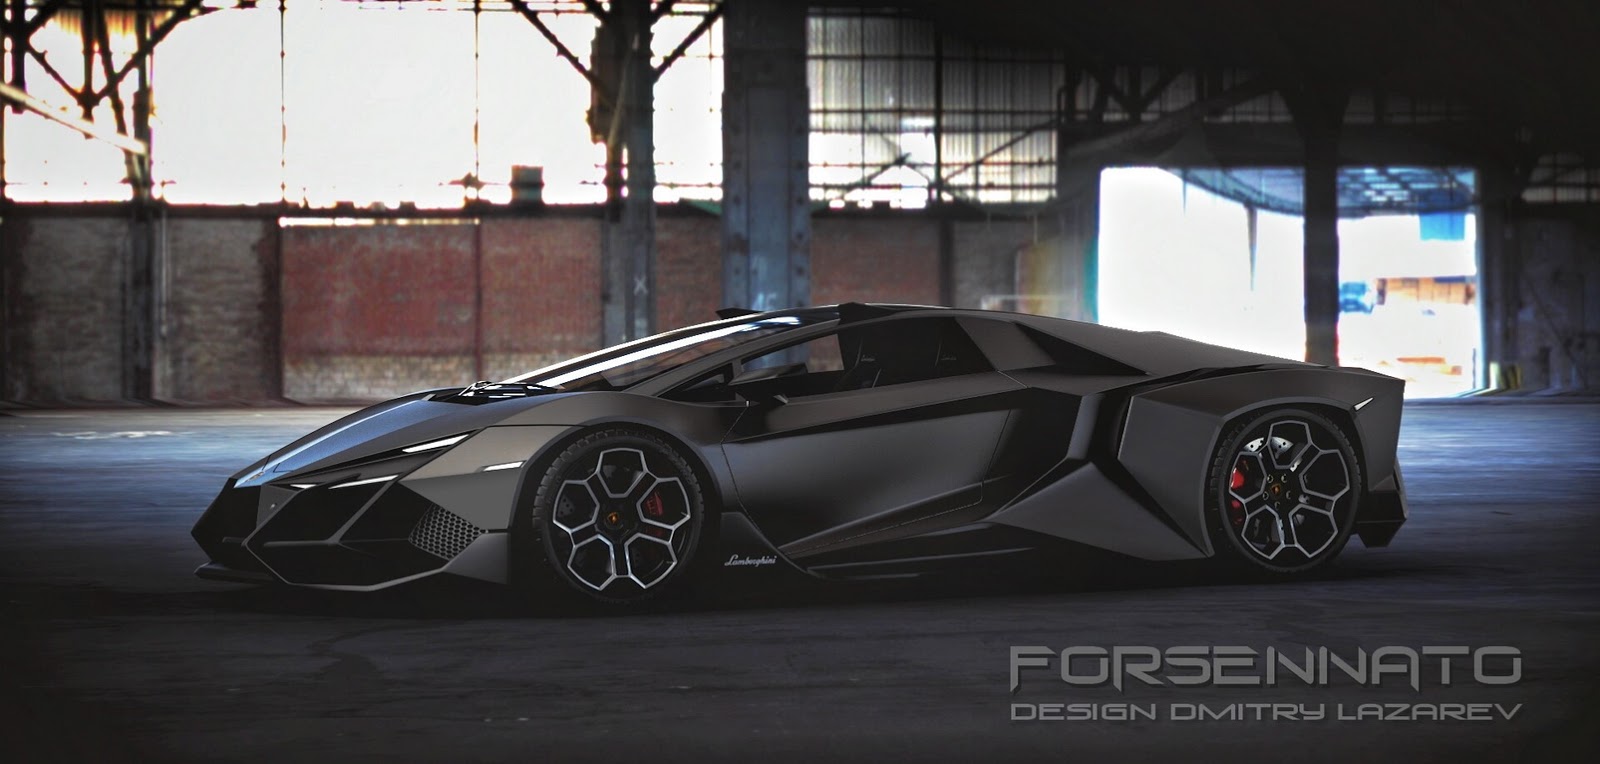 The Lamborghini Forsennato Would Be A Proper Raging Bull. If It Was Real